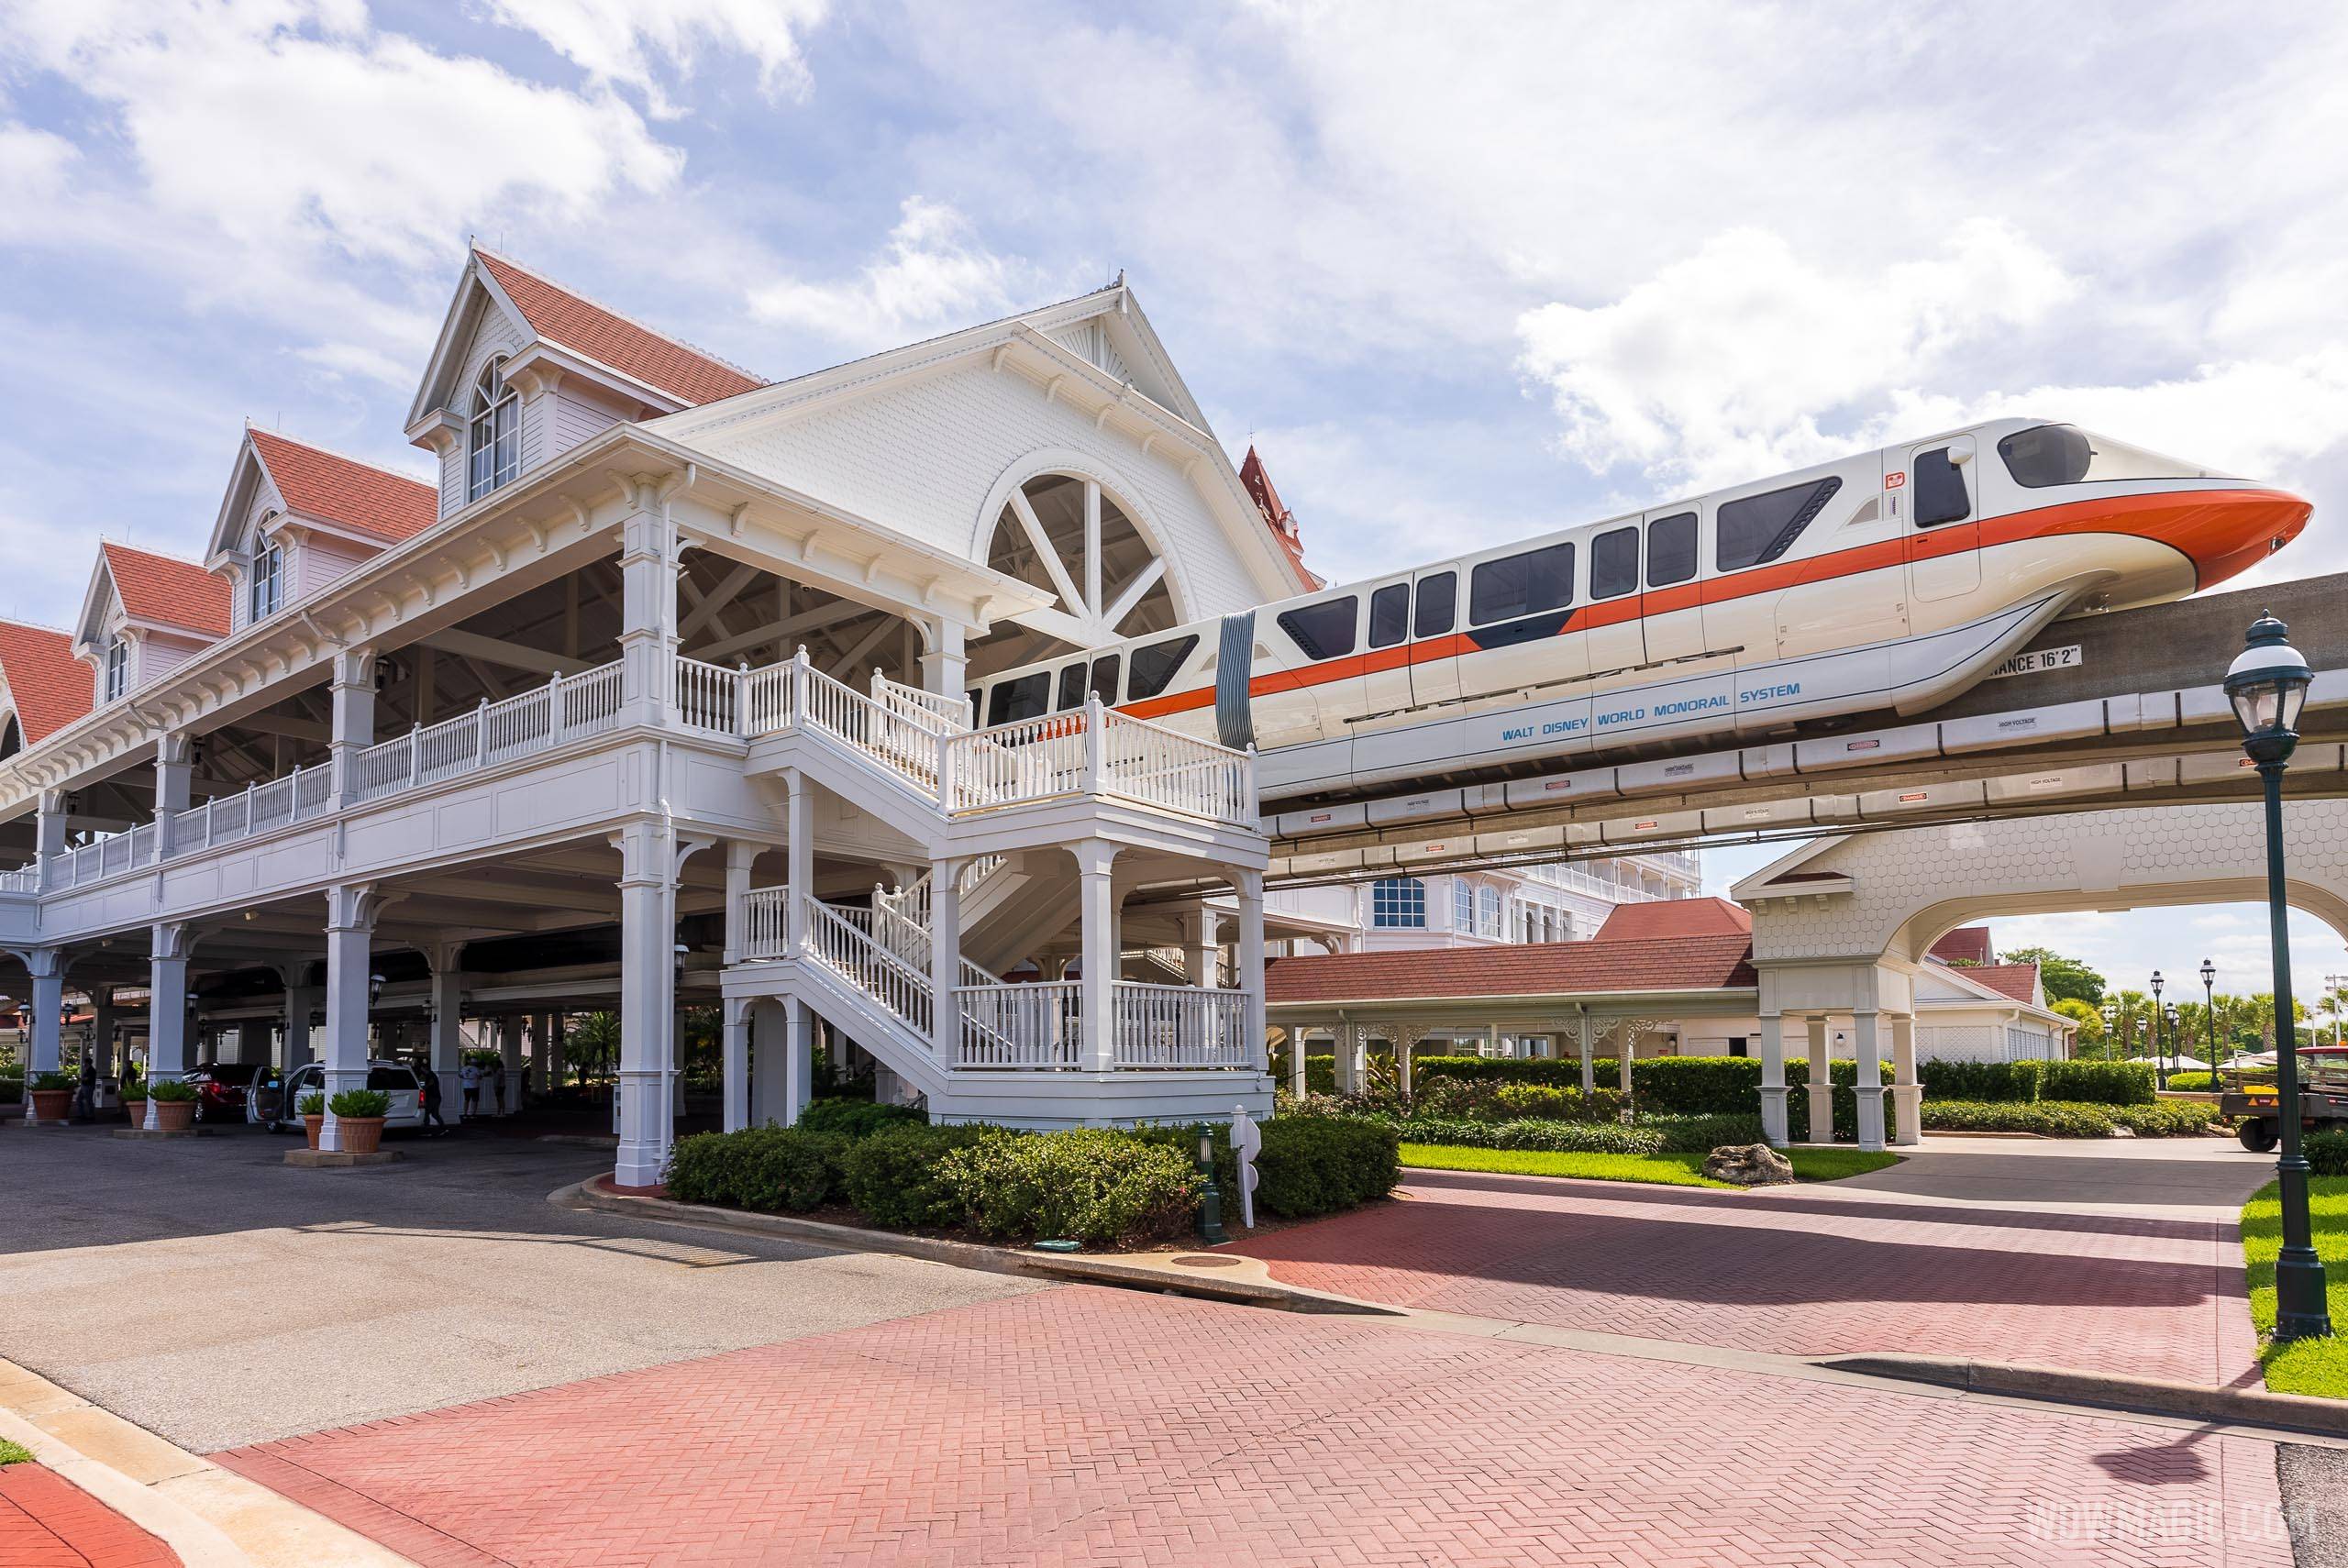 Monorail Orange on the Express Beam exits the station at Disney's Grand Floridian Resort